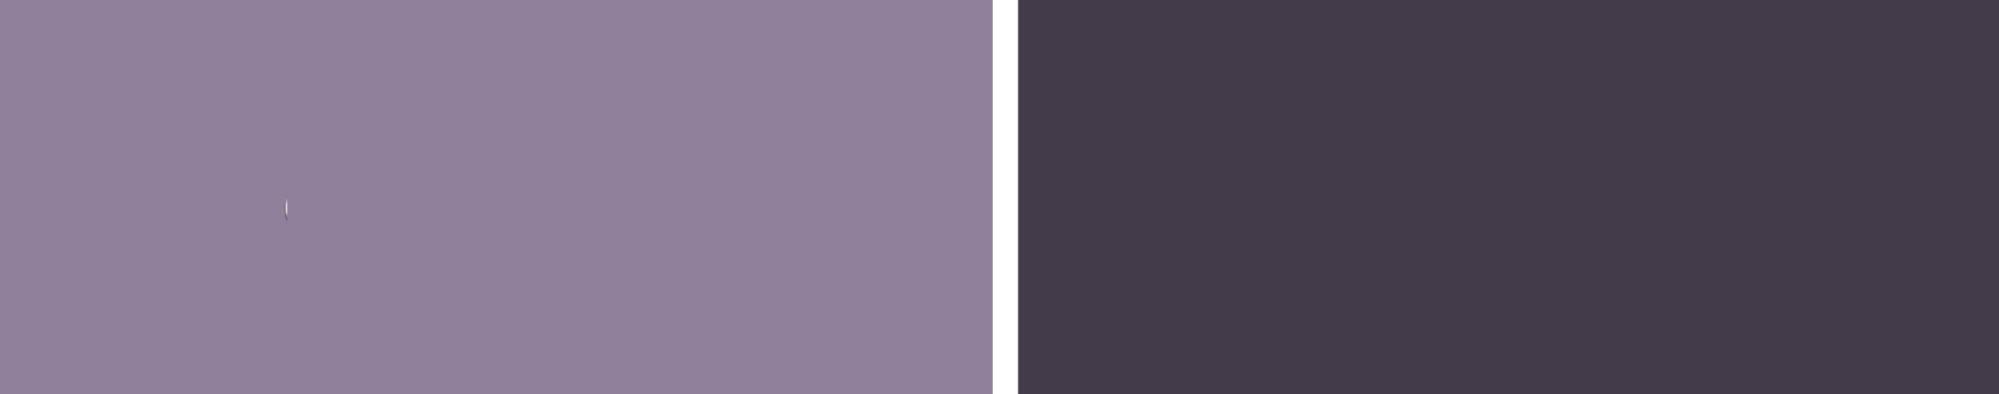 Two colors of purple, one light and grey-ish, the other very very close to charcoal.